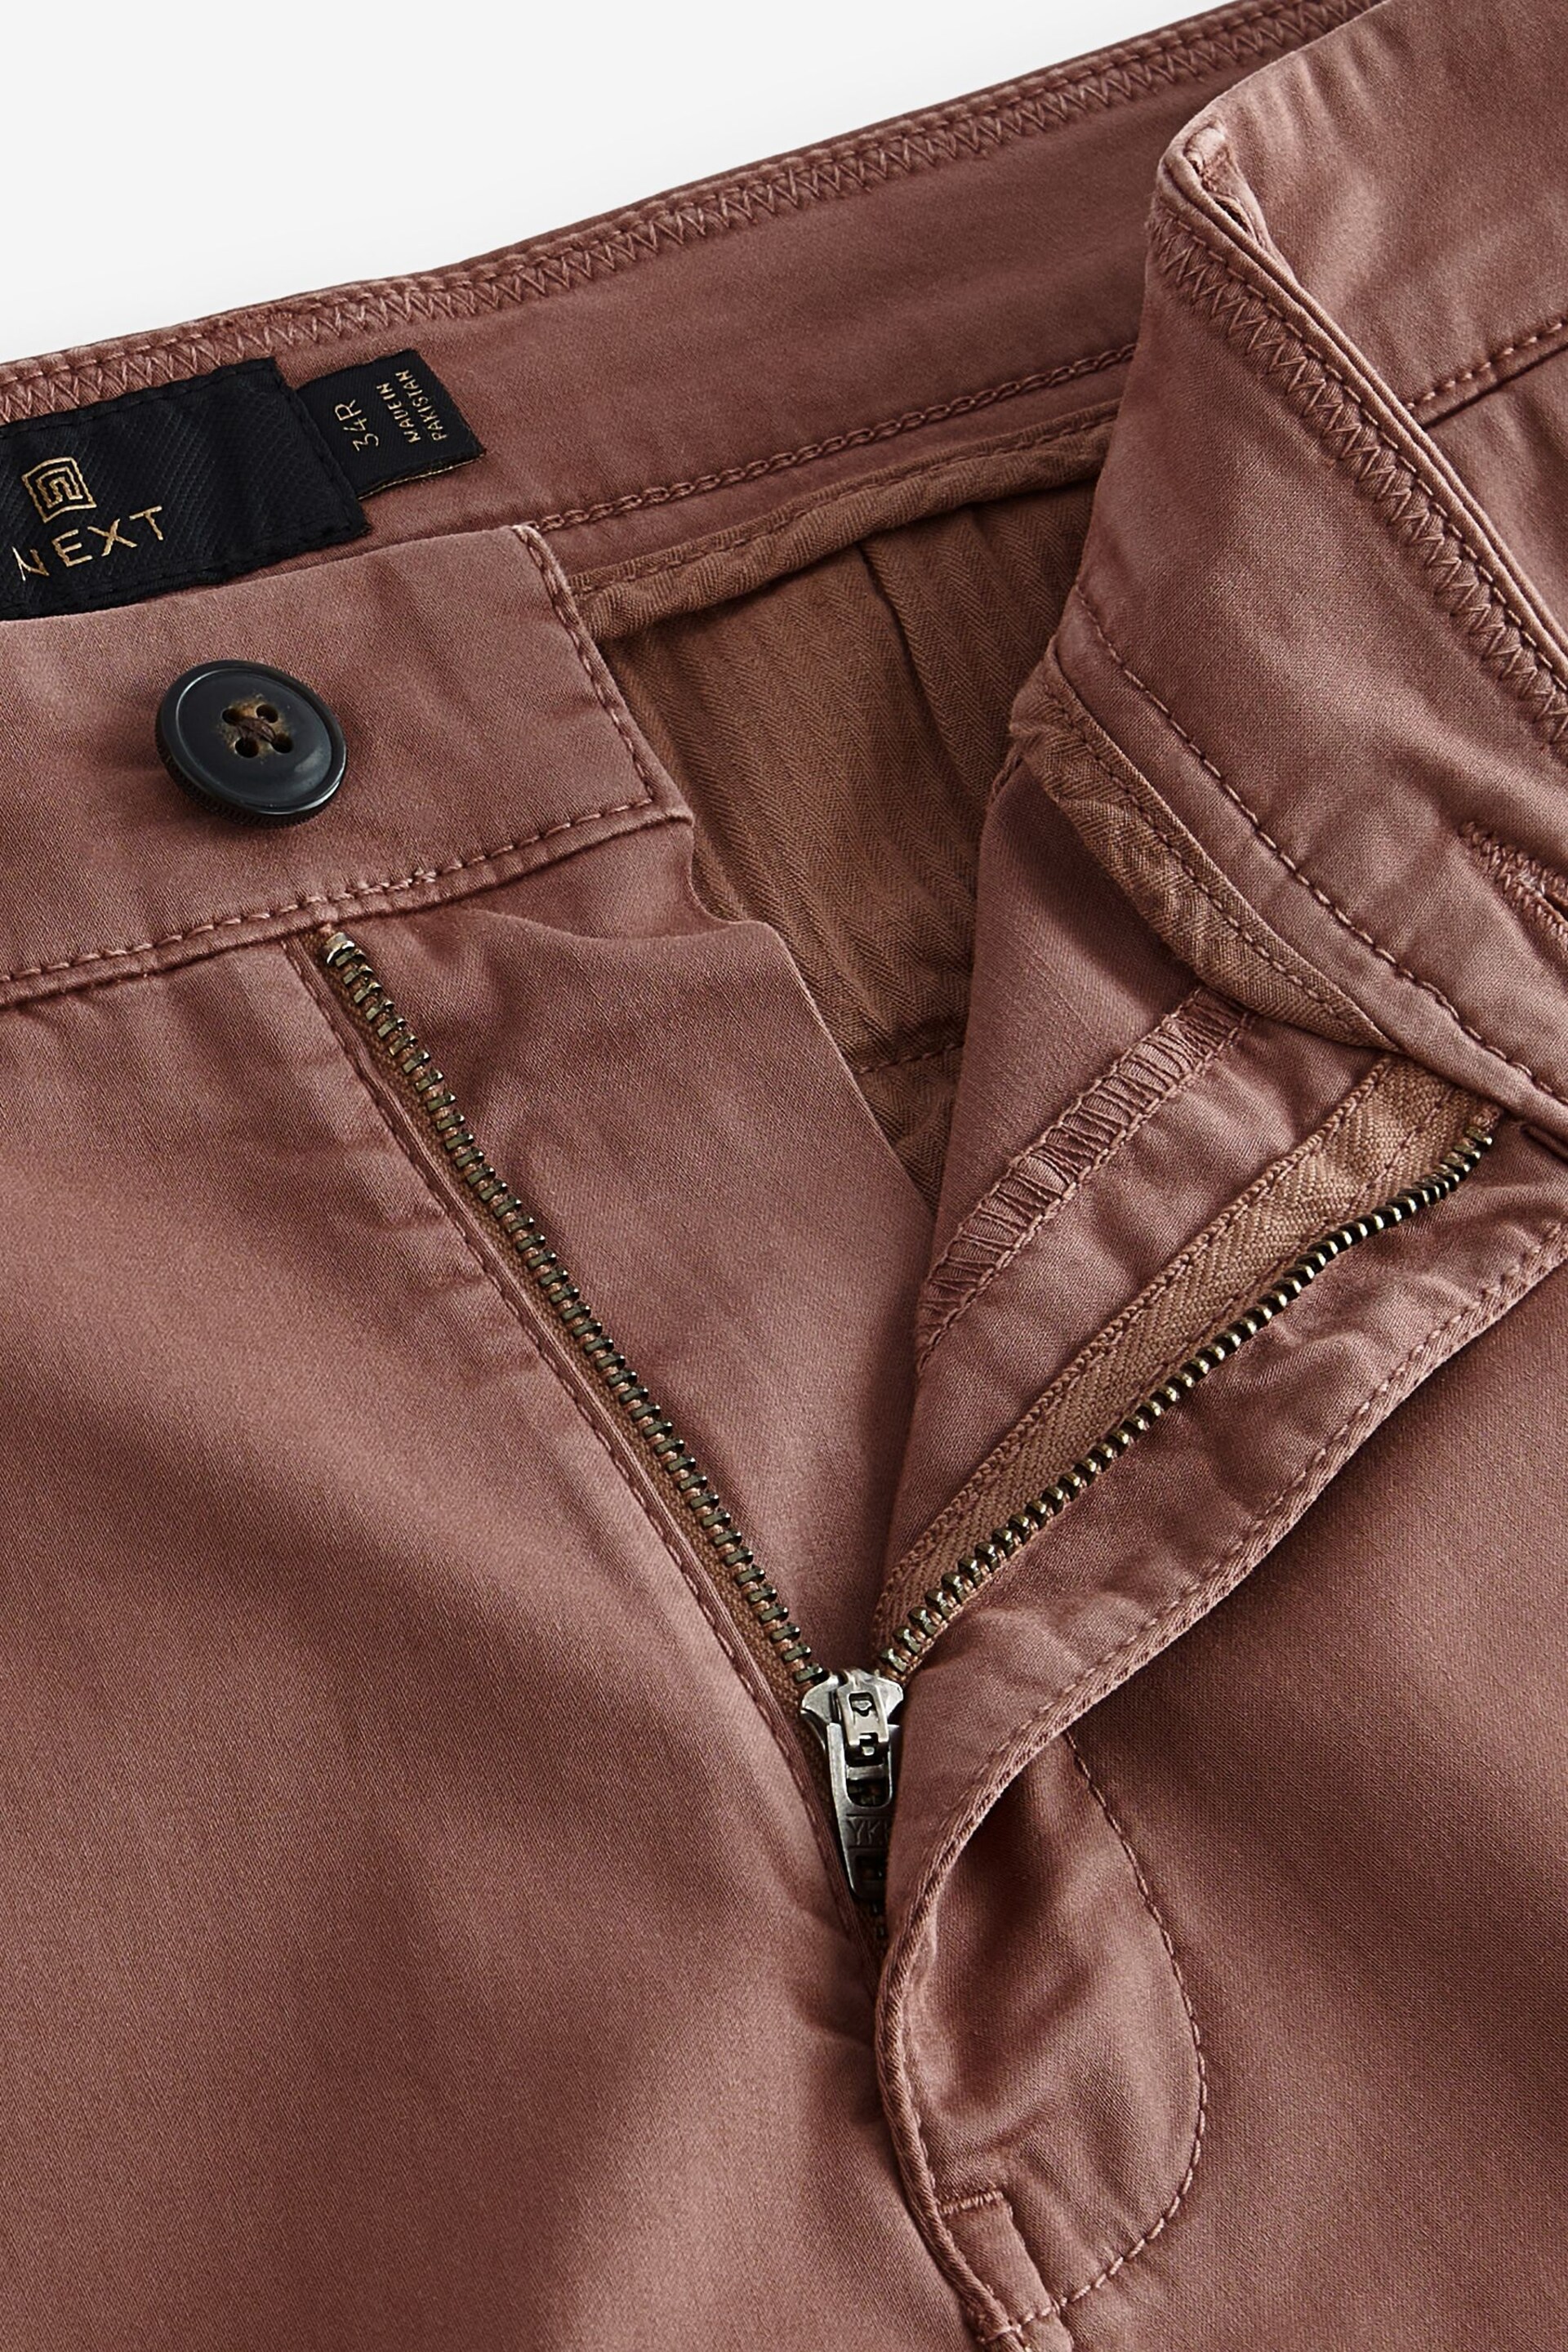 Pink Slim Fit Premium Laundered Stretch Chino Shorts - Image 9 of 10